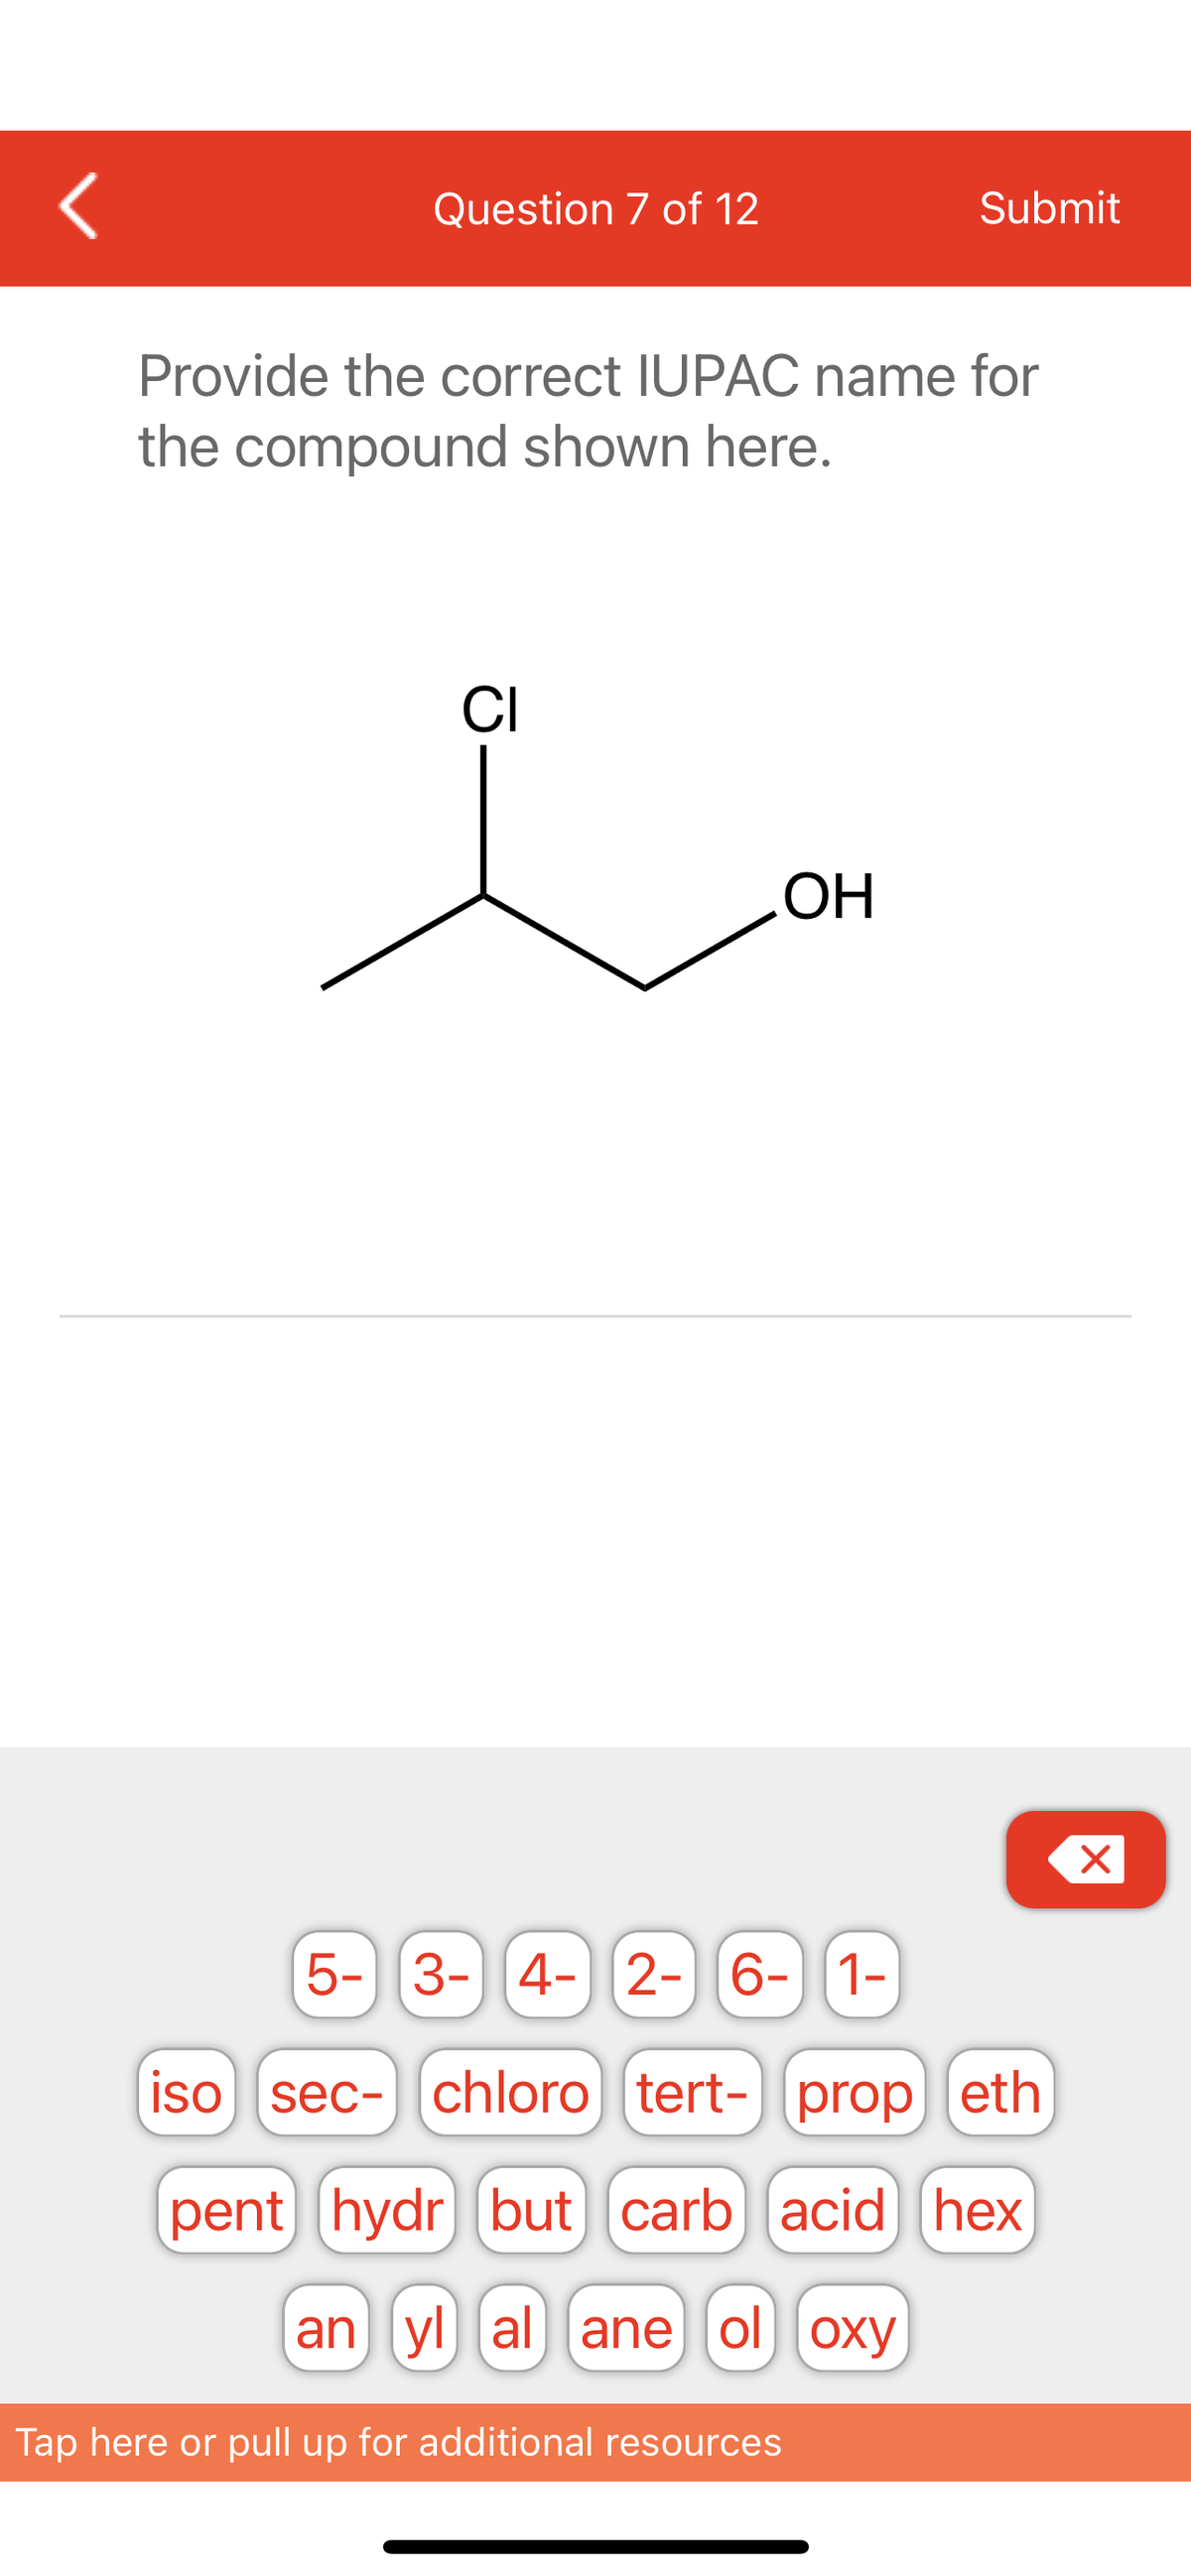 <
Question 7 of 12
Submit
Provide the correct IUPAC name for
the compound shown here.
CI
OH
X
5- 3- 4- 2- 6- 1-
iso sec- chloro tert- prop eth
pent hydr but carb acid hex
an yl al ane ol oxy
Tap here or pull up for additional resources